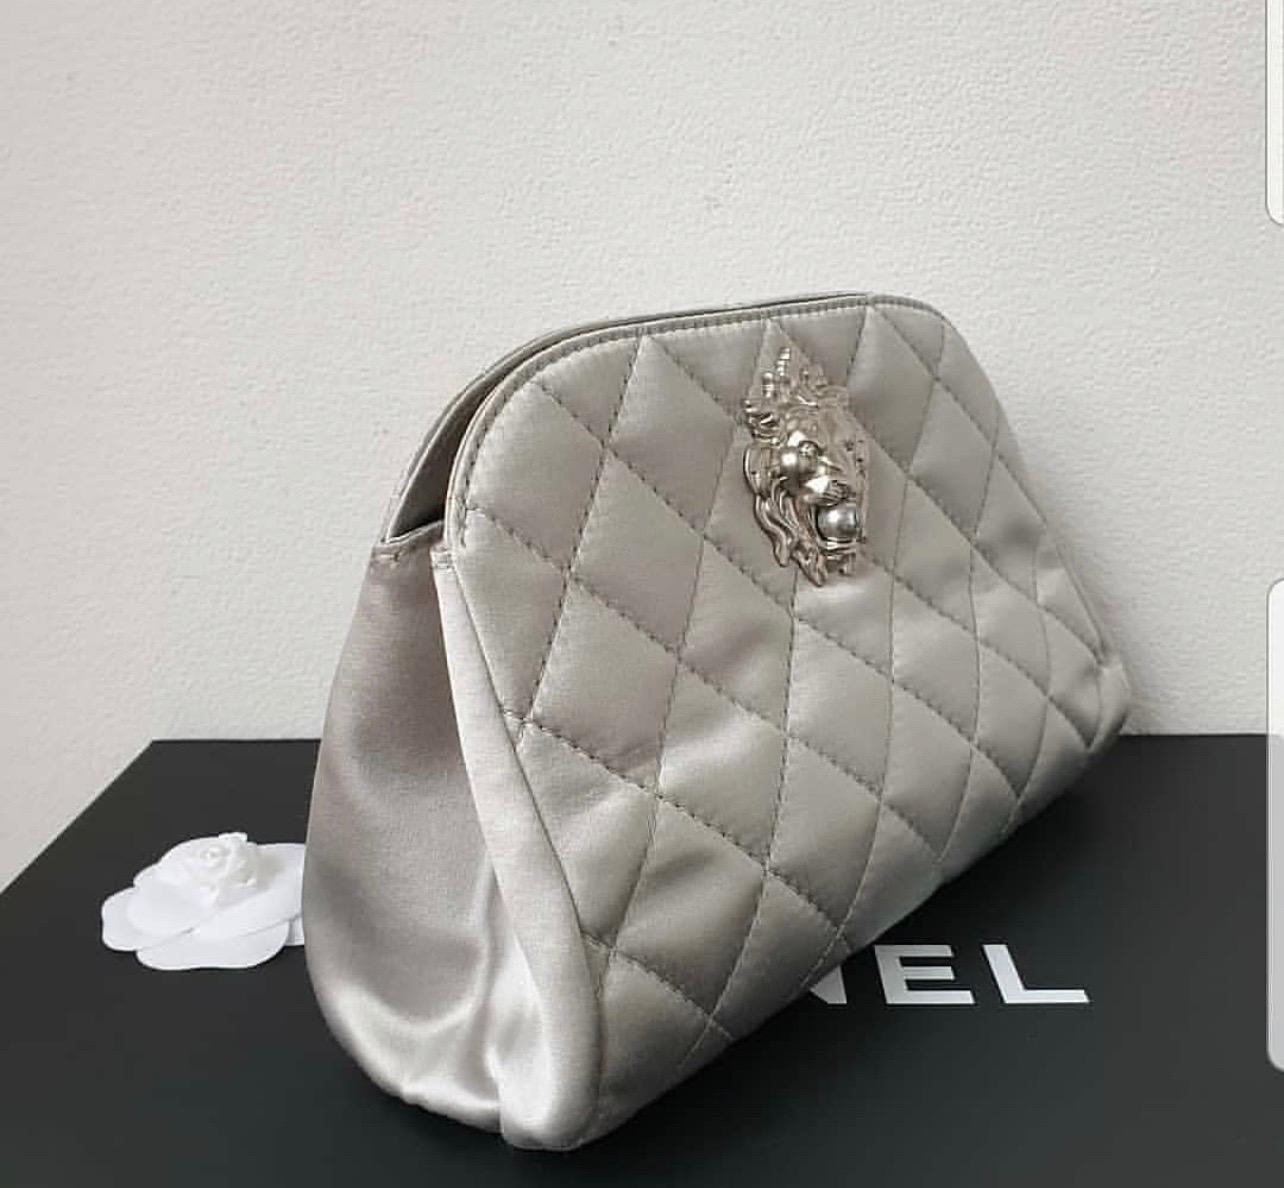 This authentic Chanel Leo Lion Clutch Quilted Satin Small presented in the brand's Cruise 2010-2011 Collection inspired by Coco Chanel's sign is an elegant accessory made for a formal night out. Crafted from diamond quilted silver satin, this mini